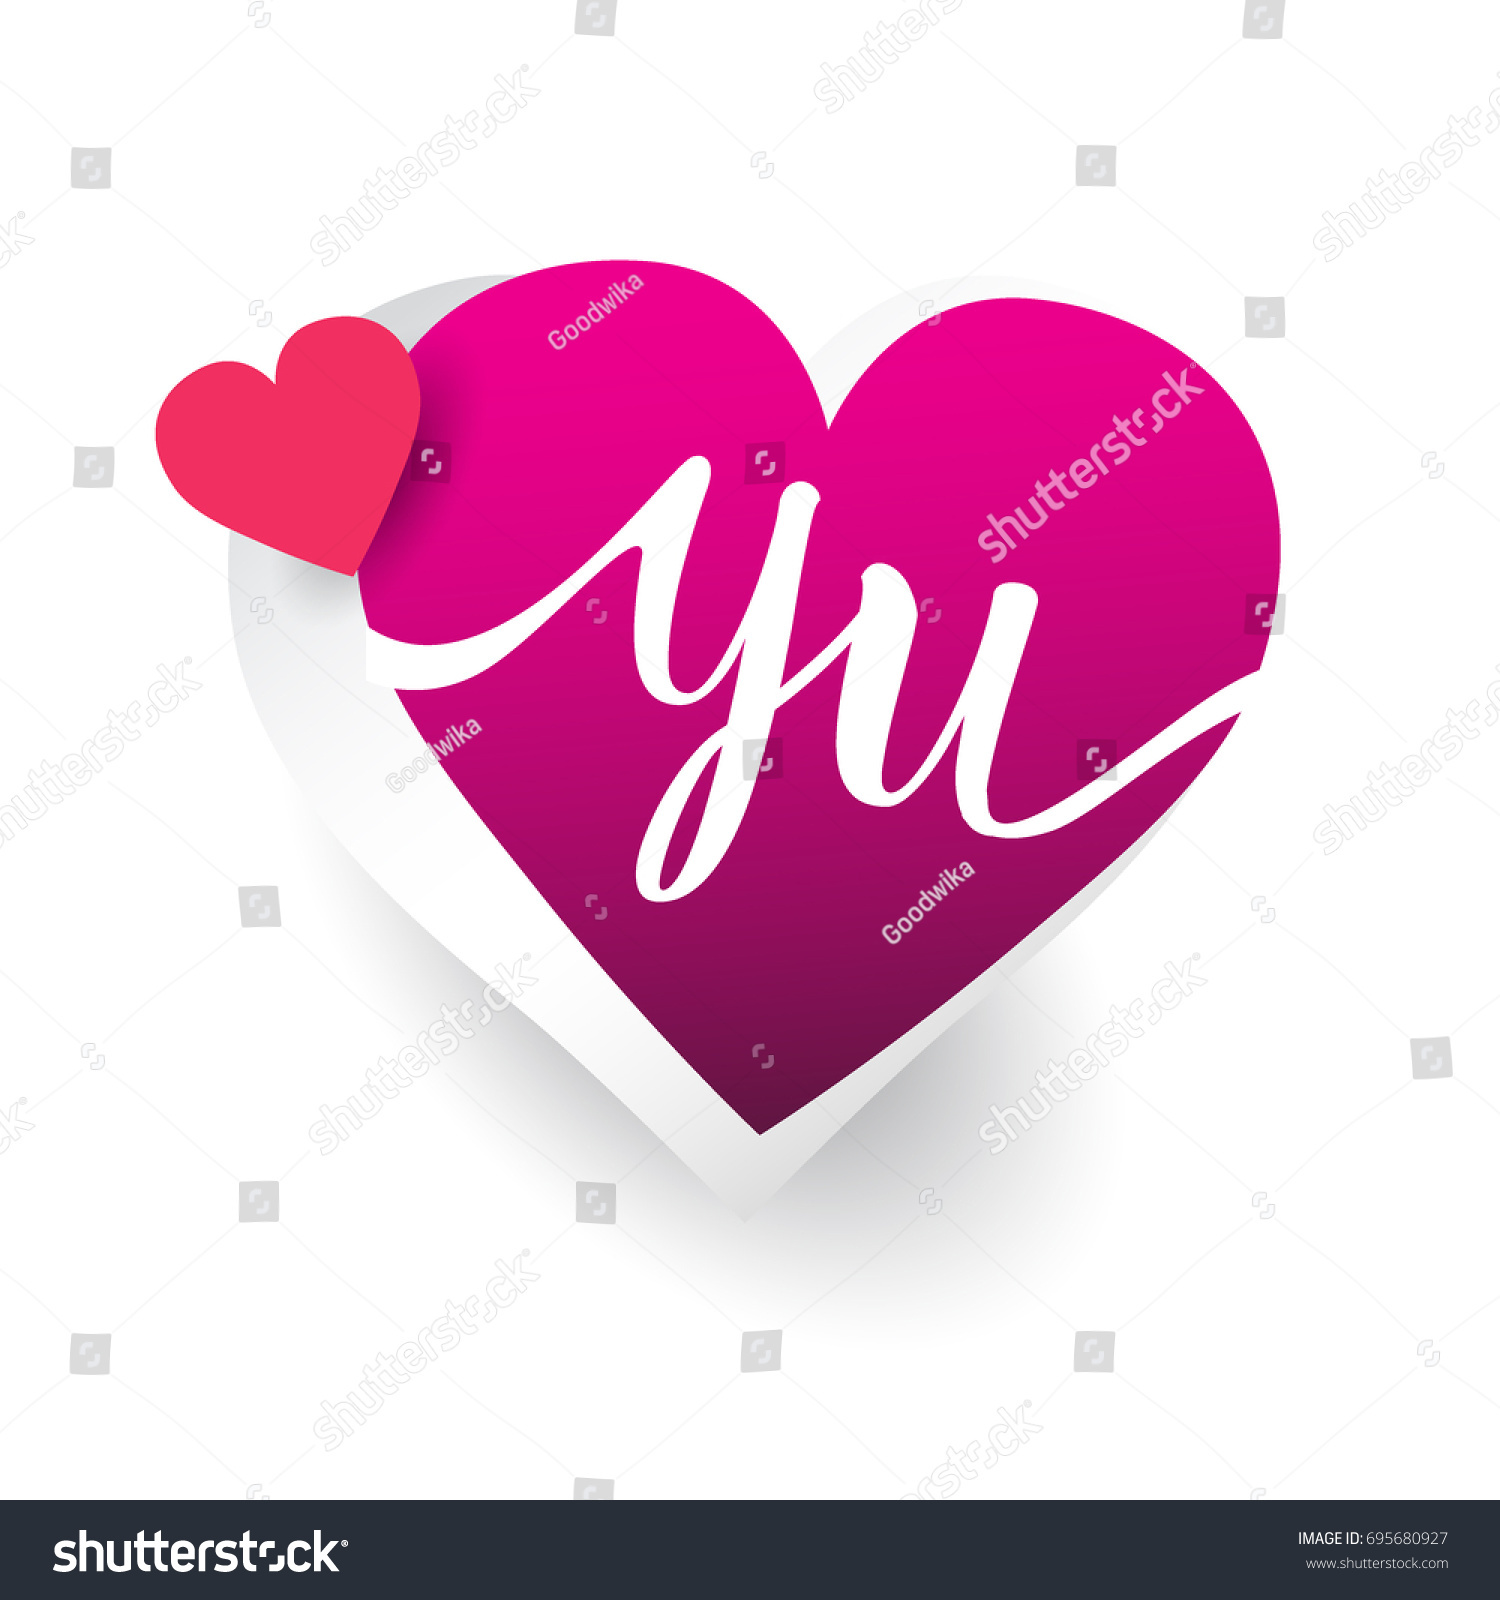 Initial Logo Letter Yy With Heart Shape Red Colored Logo Design For